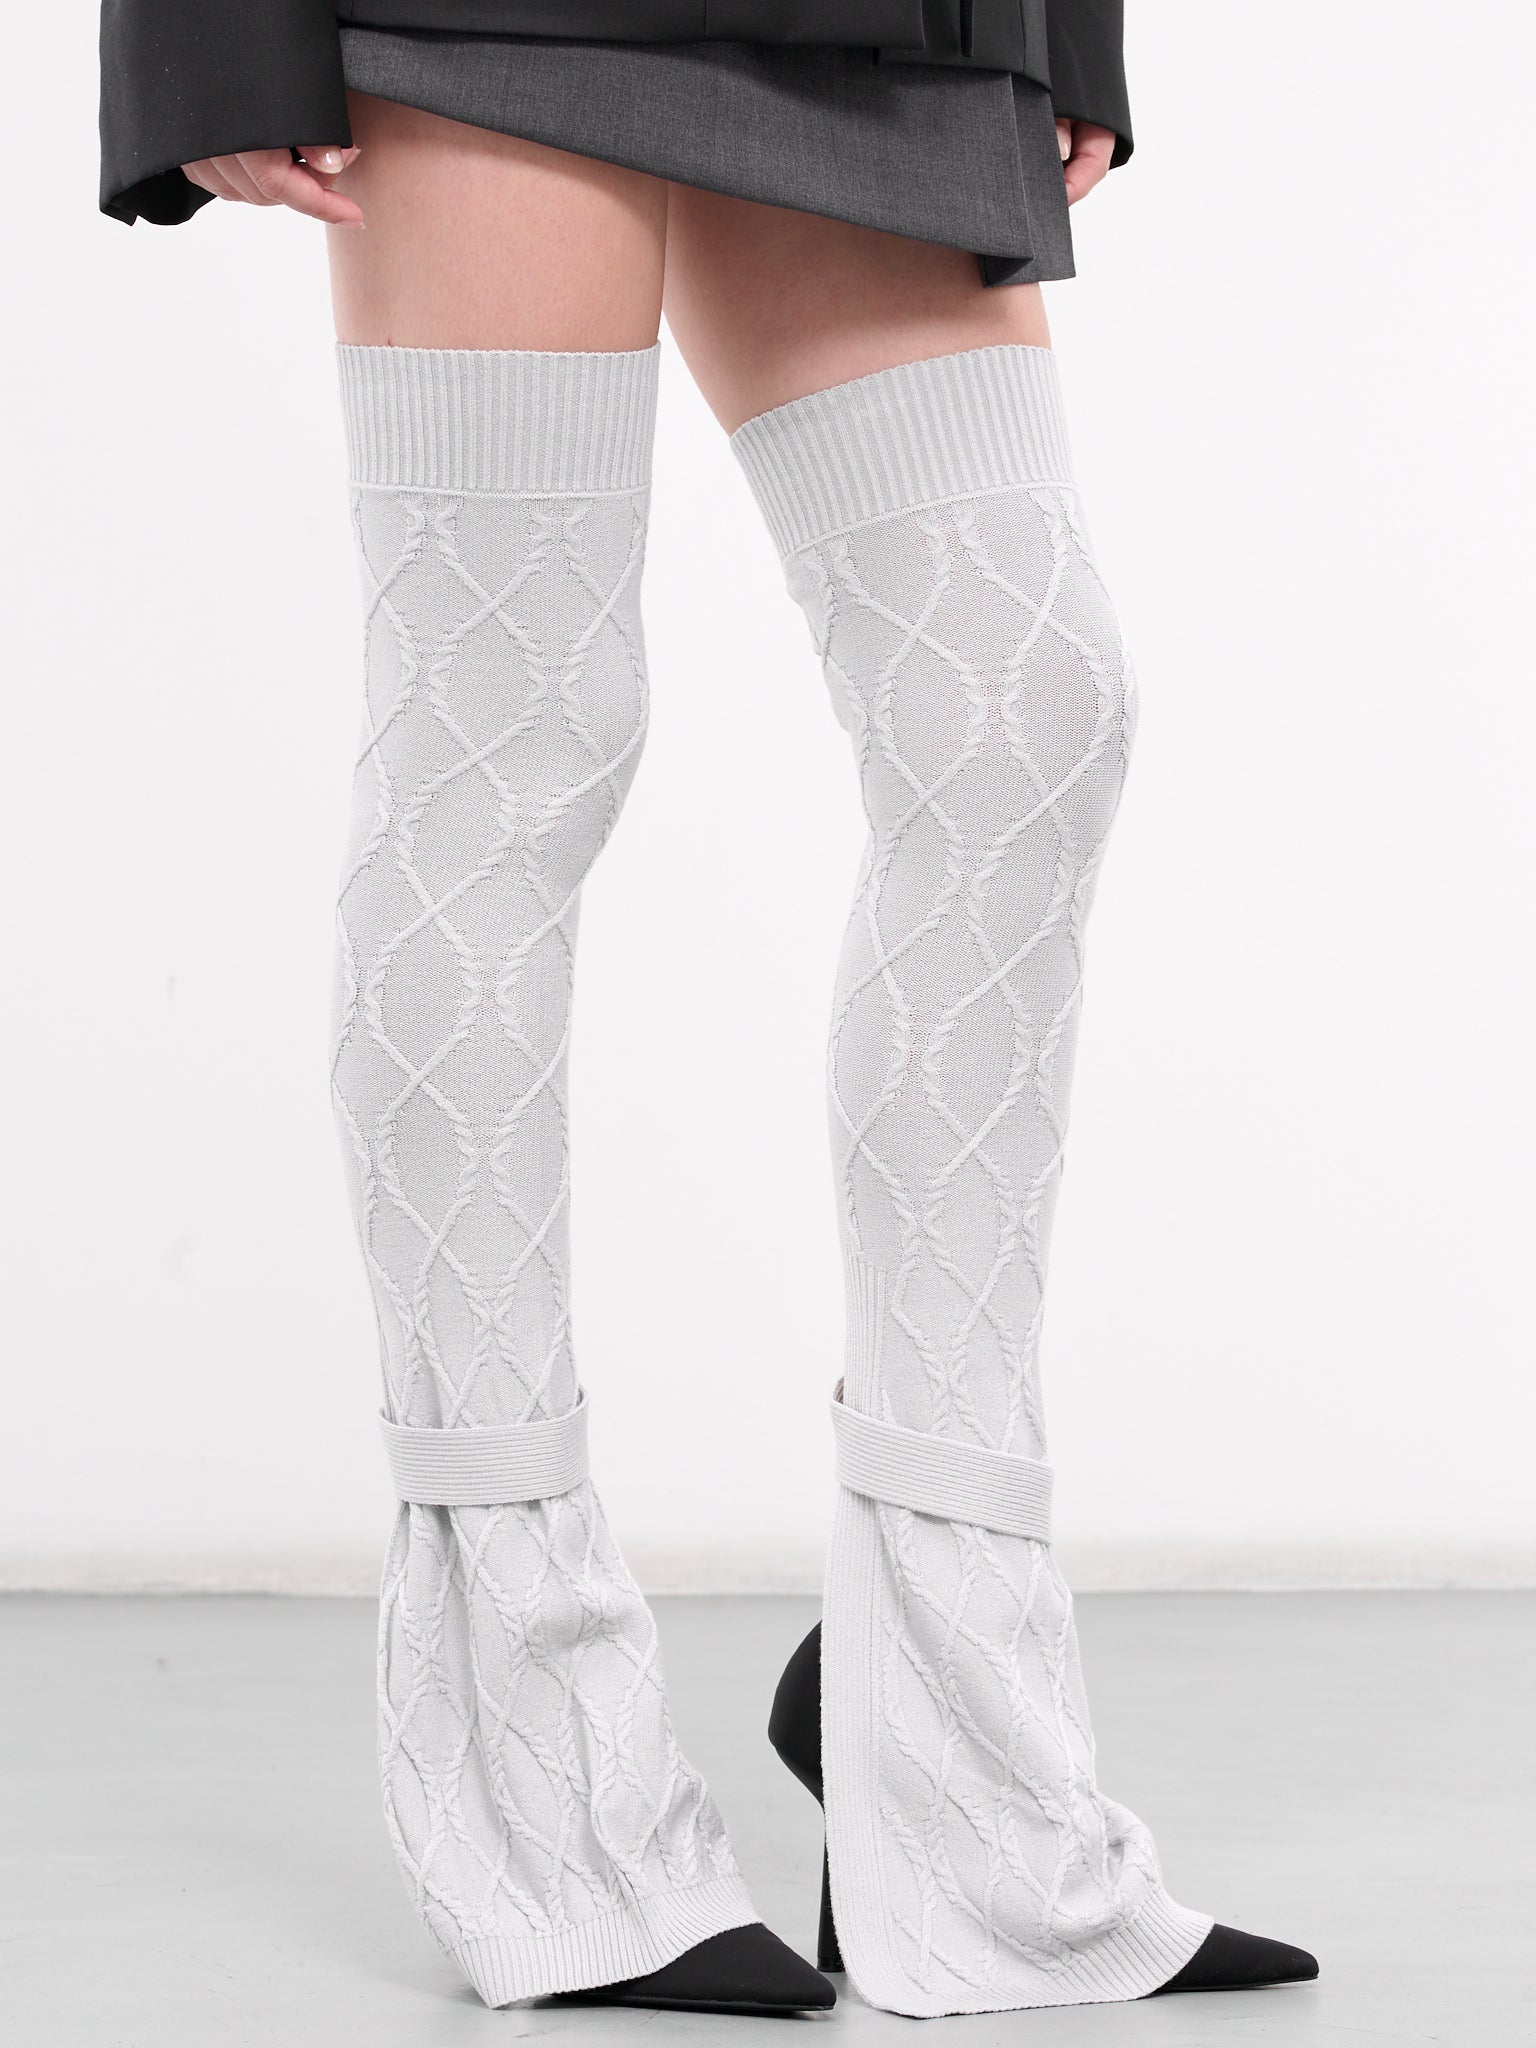 Cable-Knit Leg Warmers (998-004-GREY)